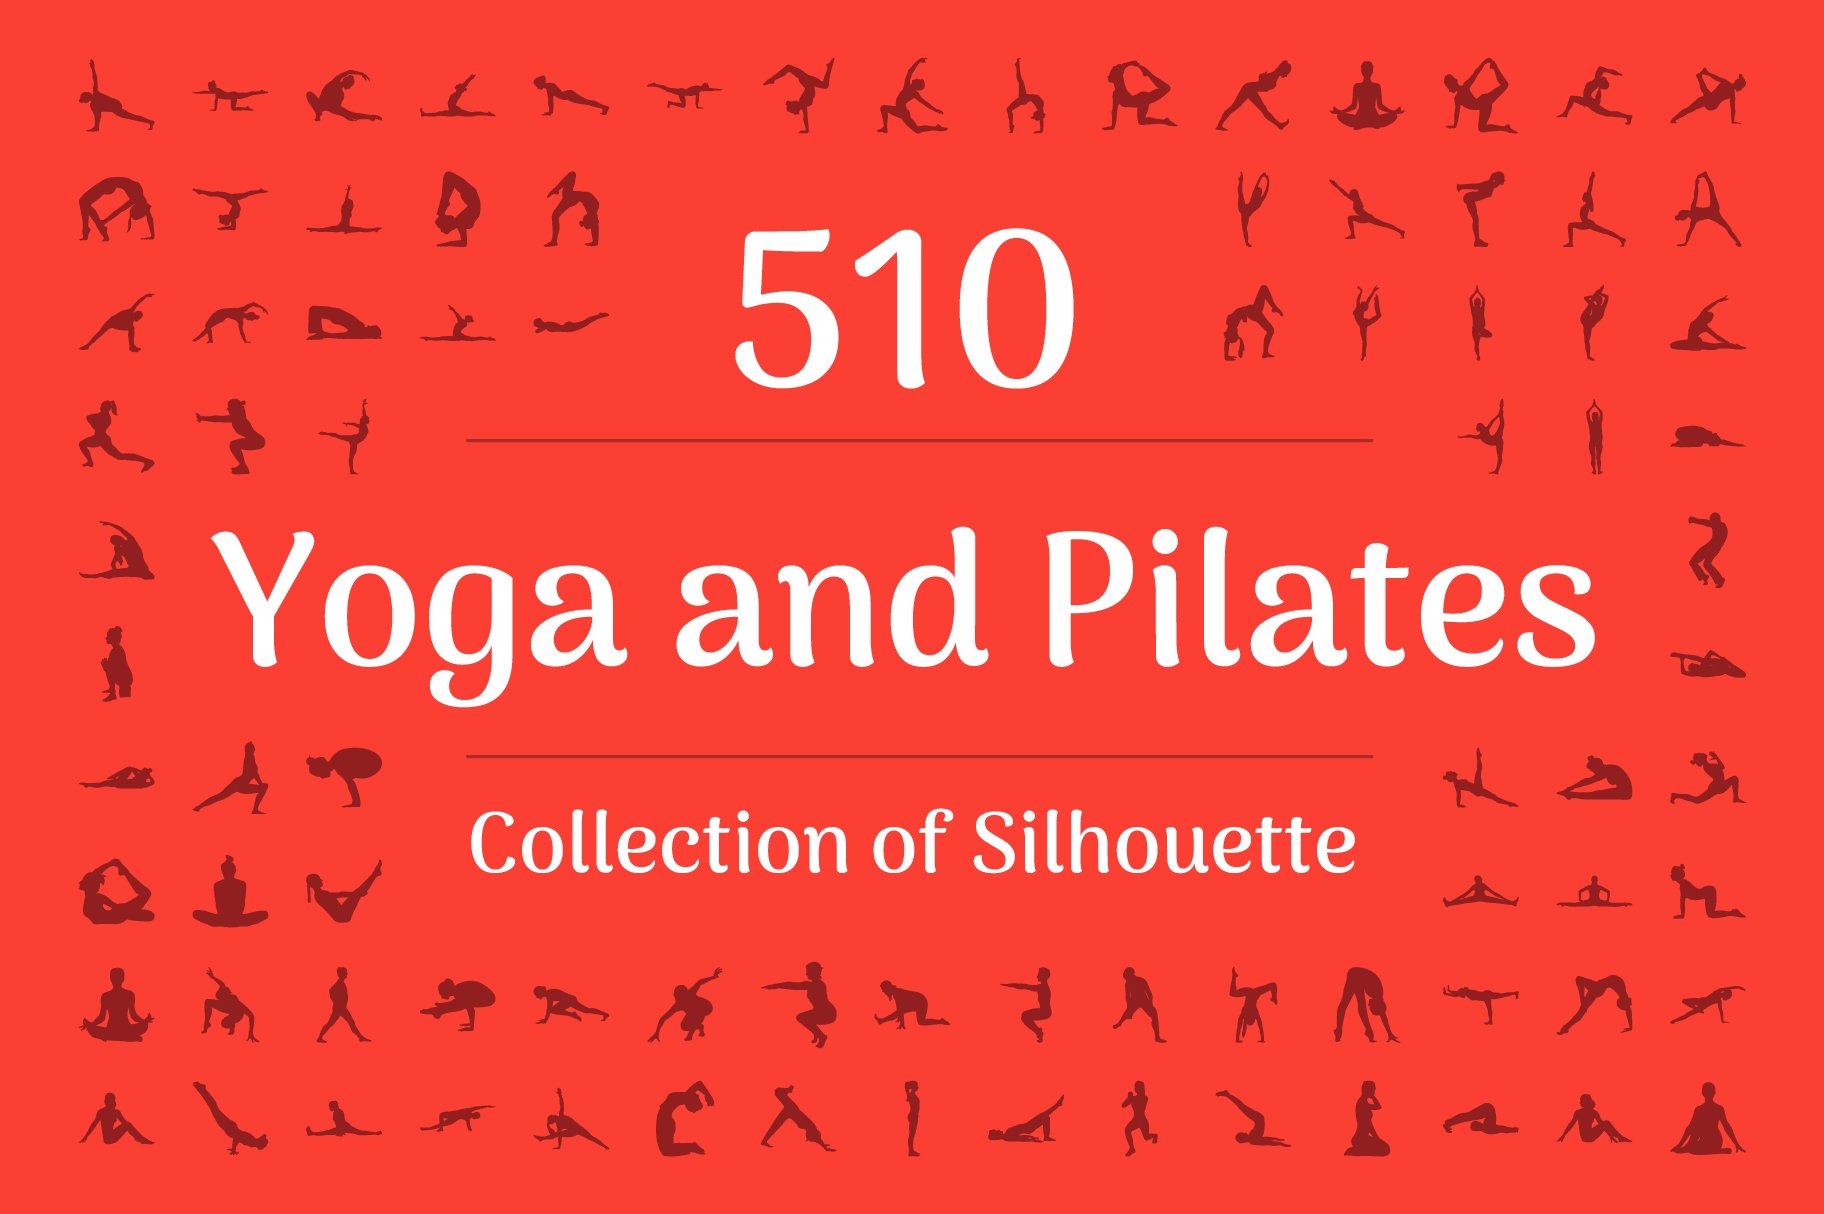 510 Yoga and Pilates Silhouette cover image.